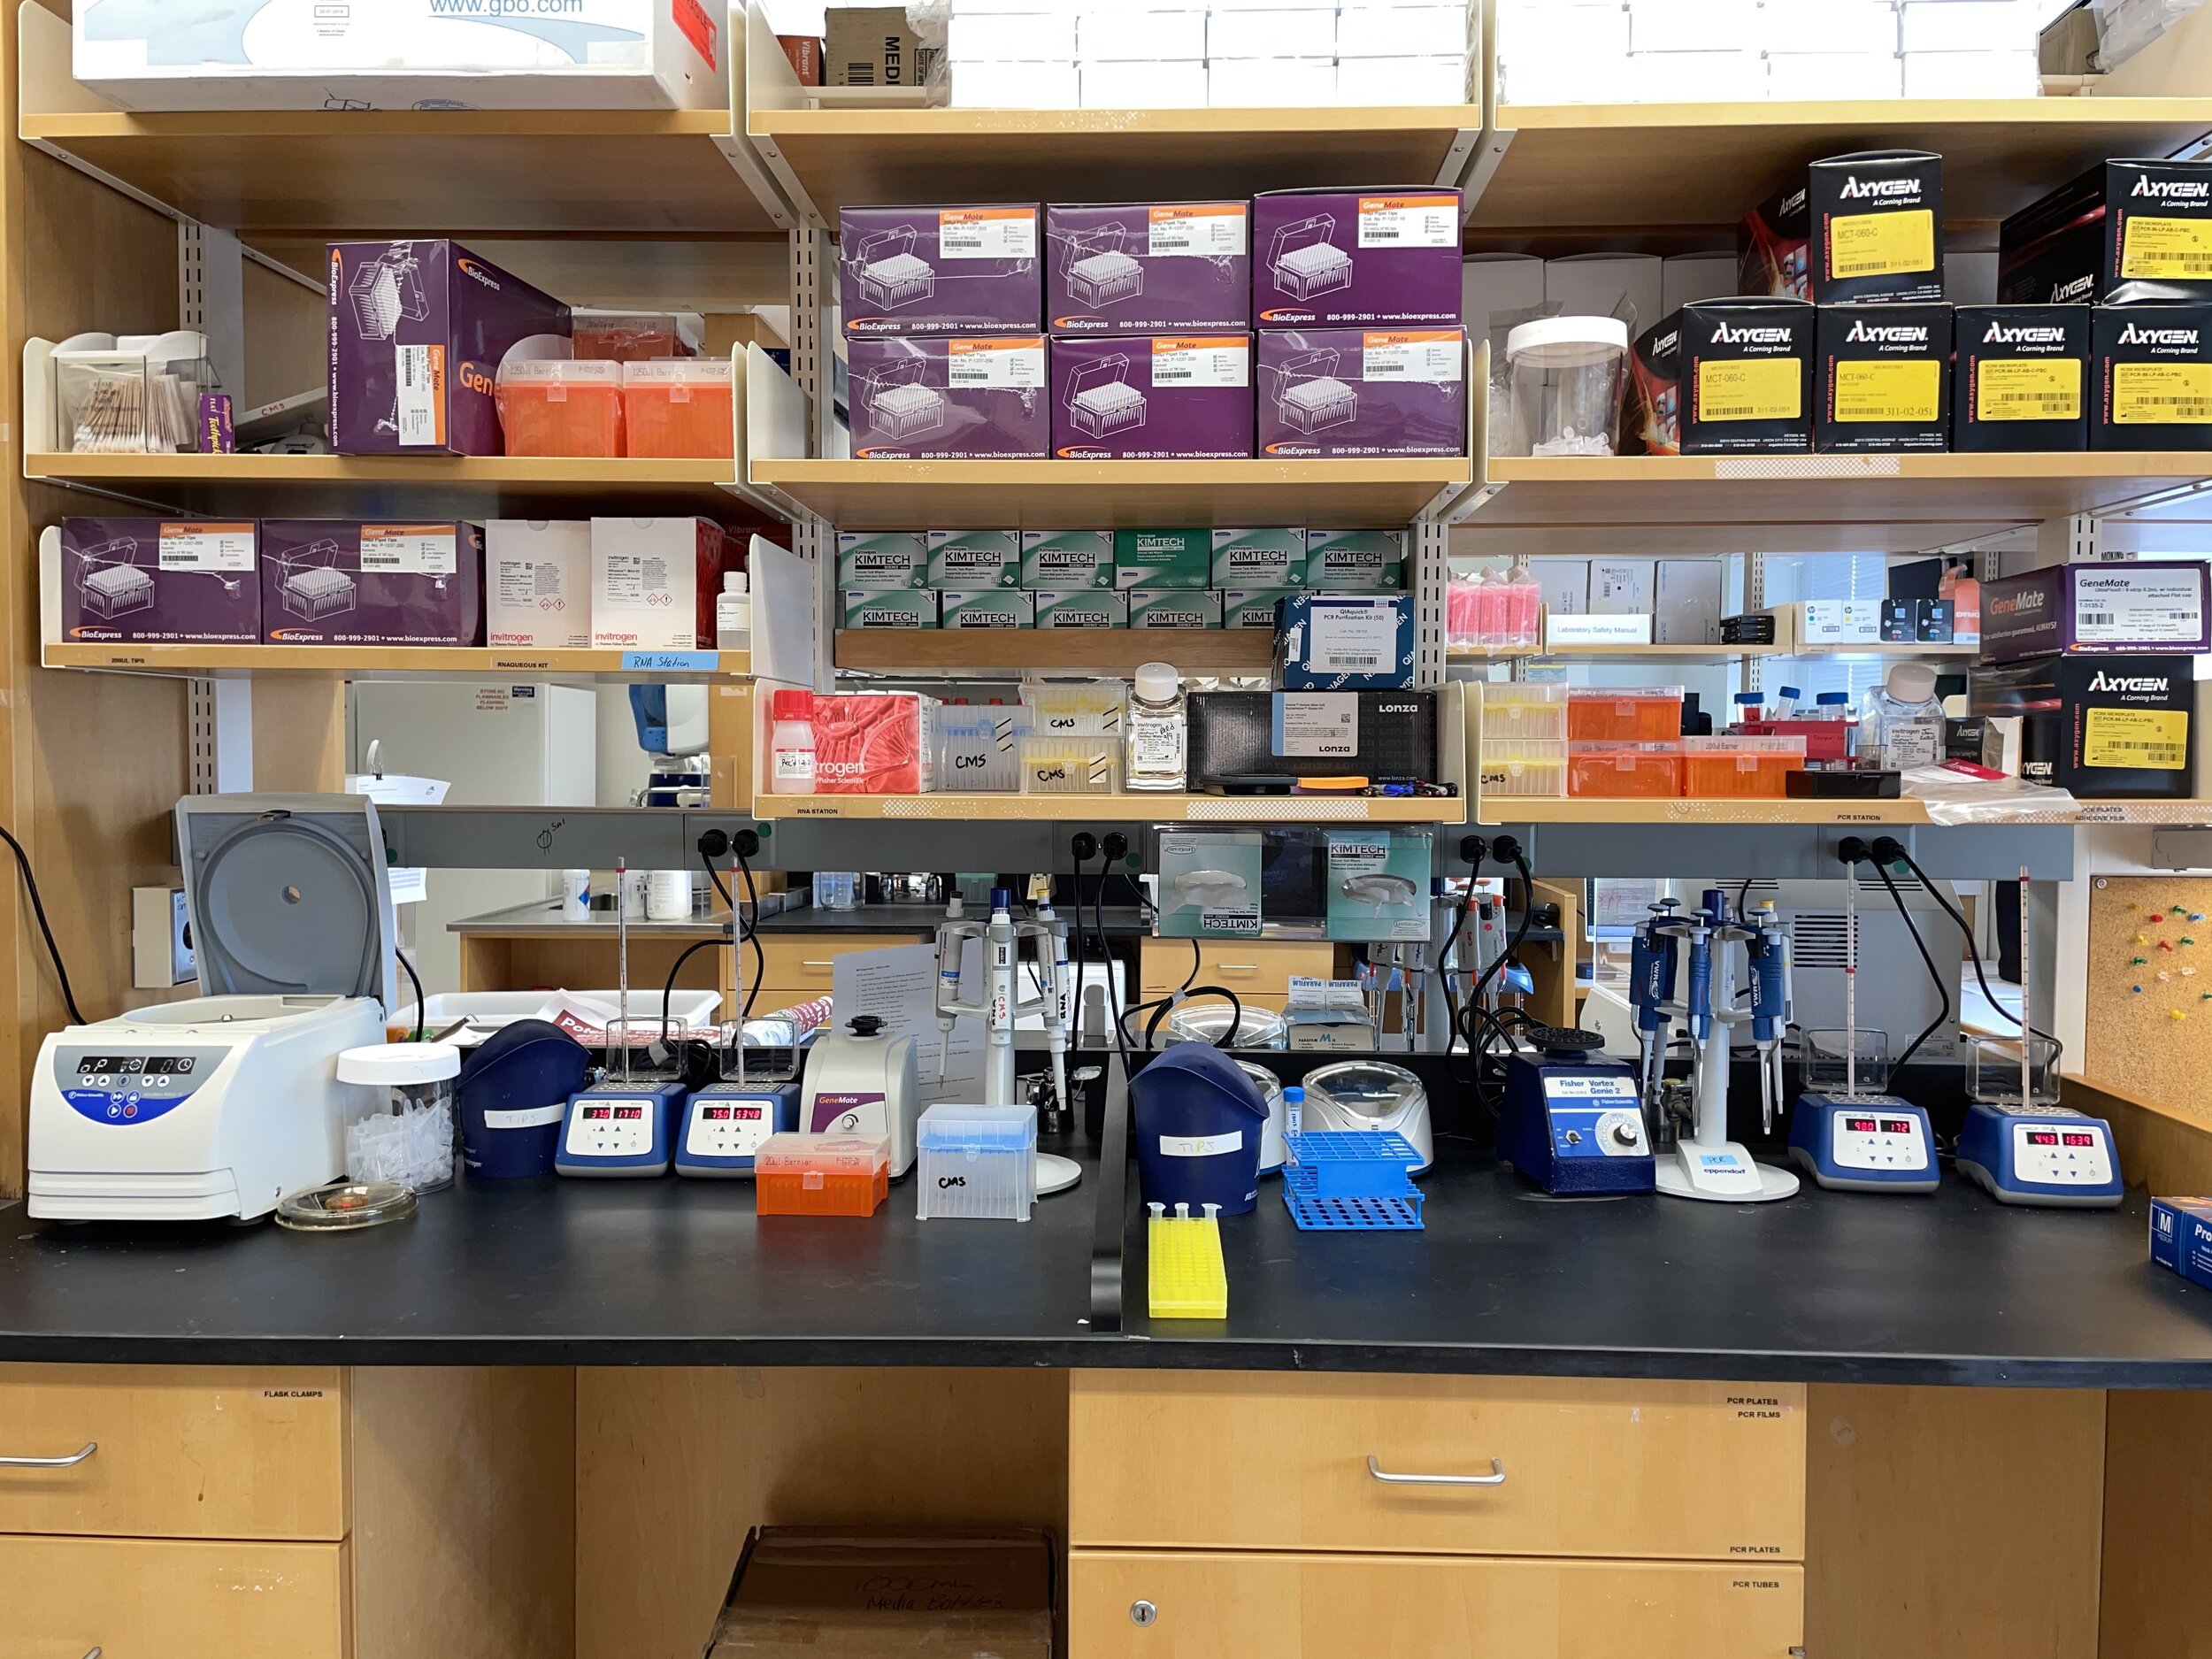 Our RNA and PCR benches